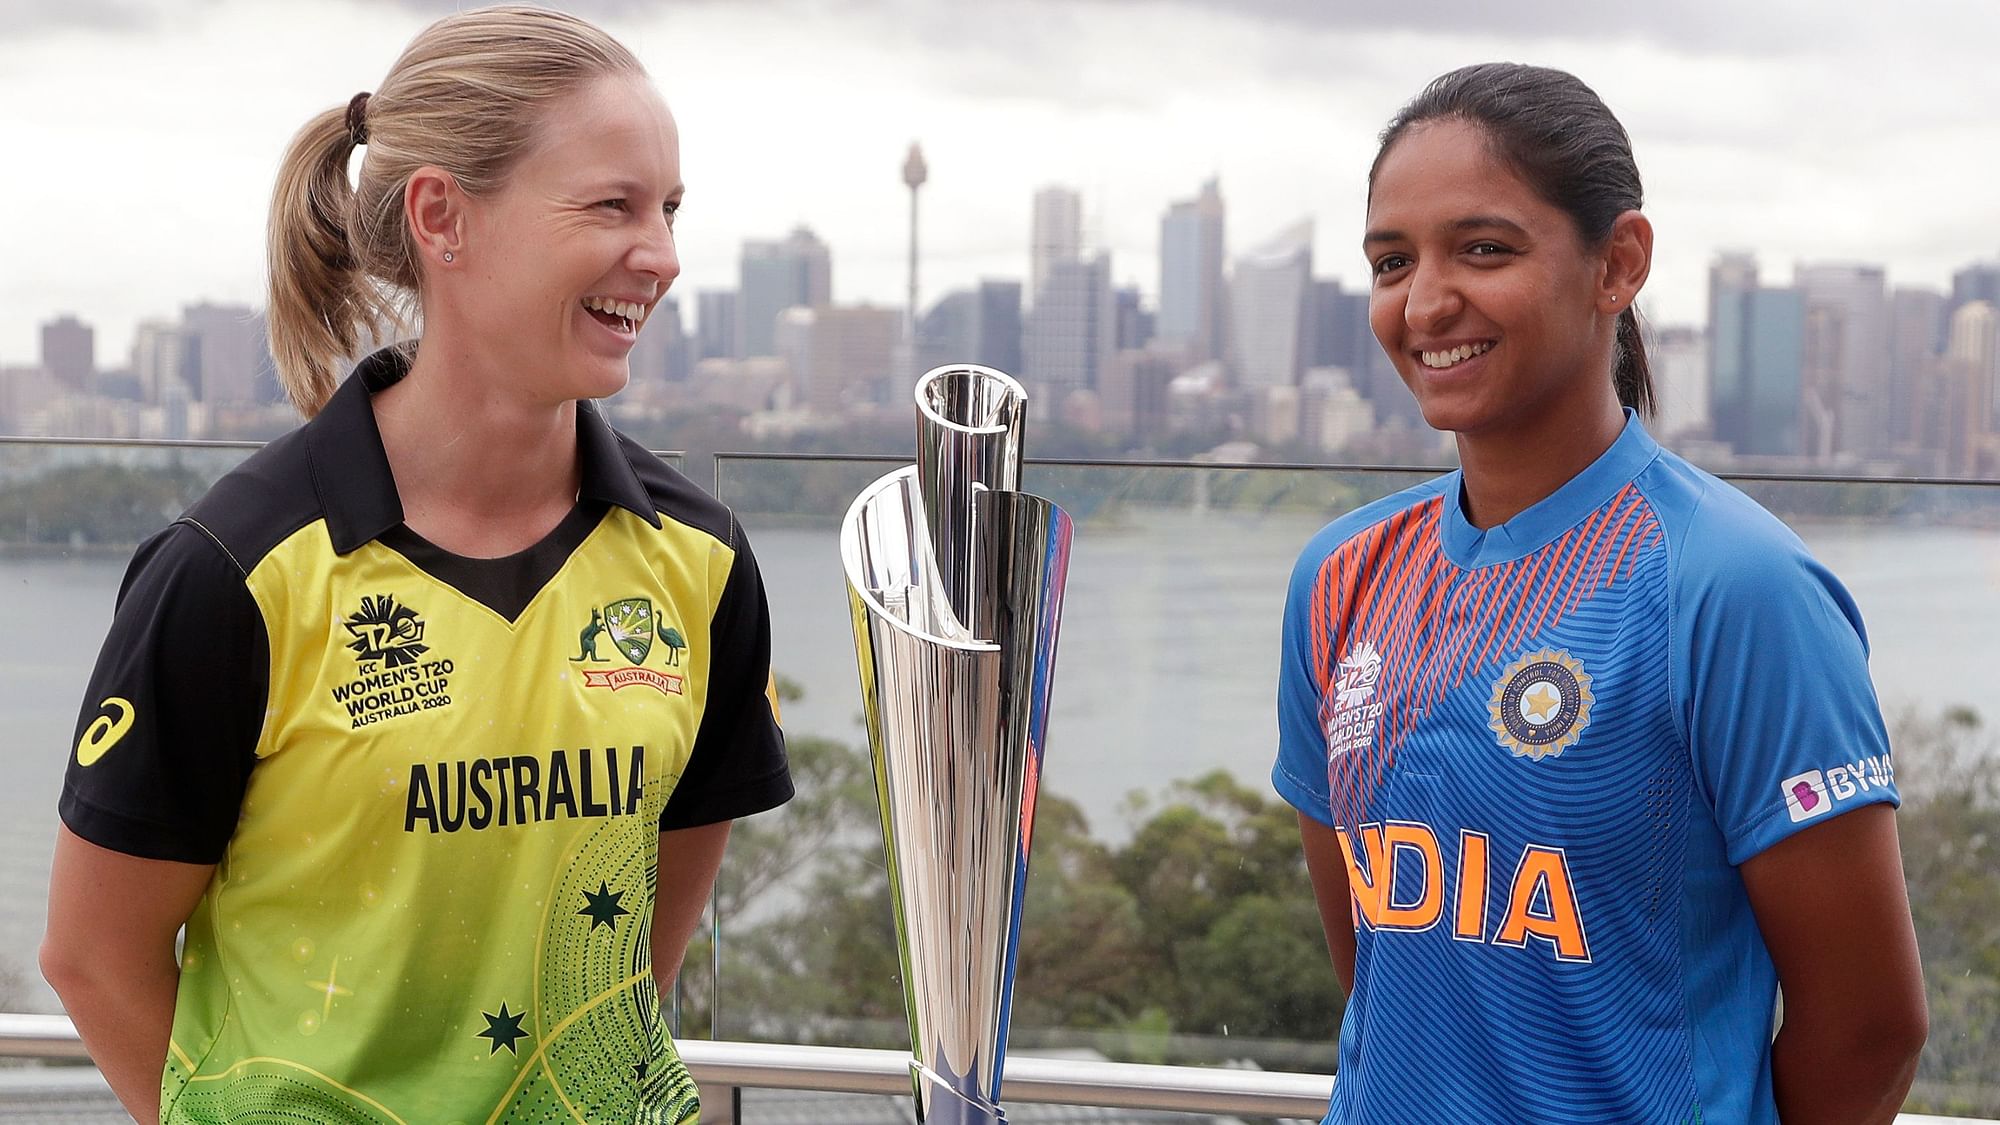 India and Australia are into the Women’s Twenty20 Cricket World Cup final